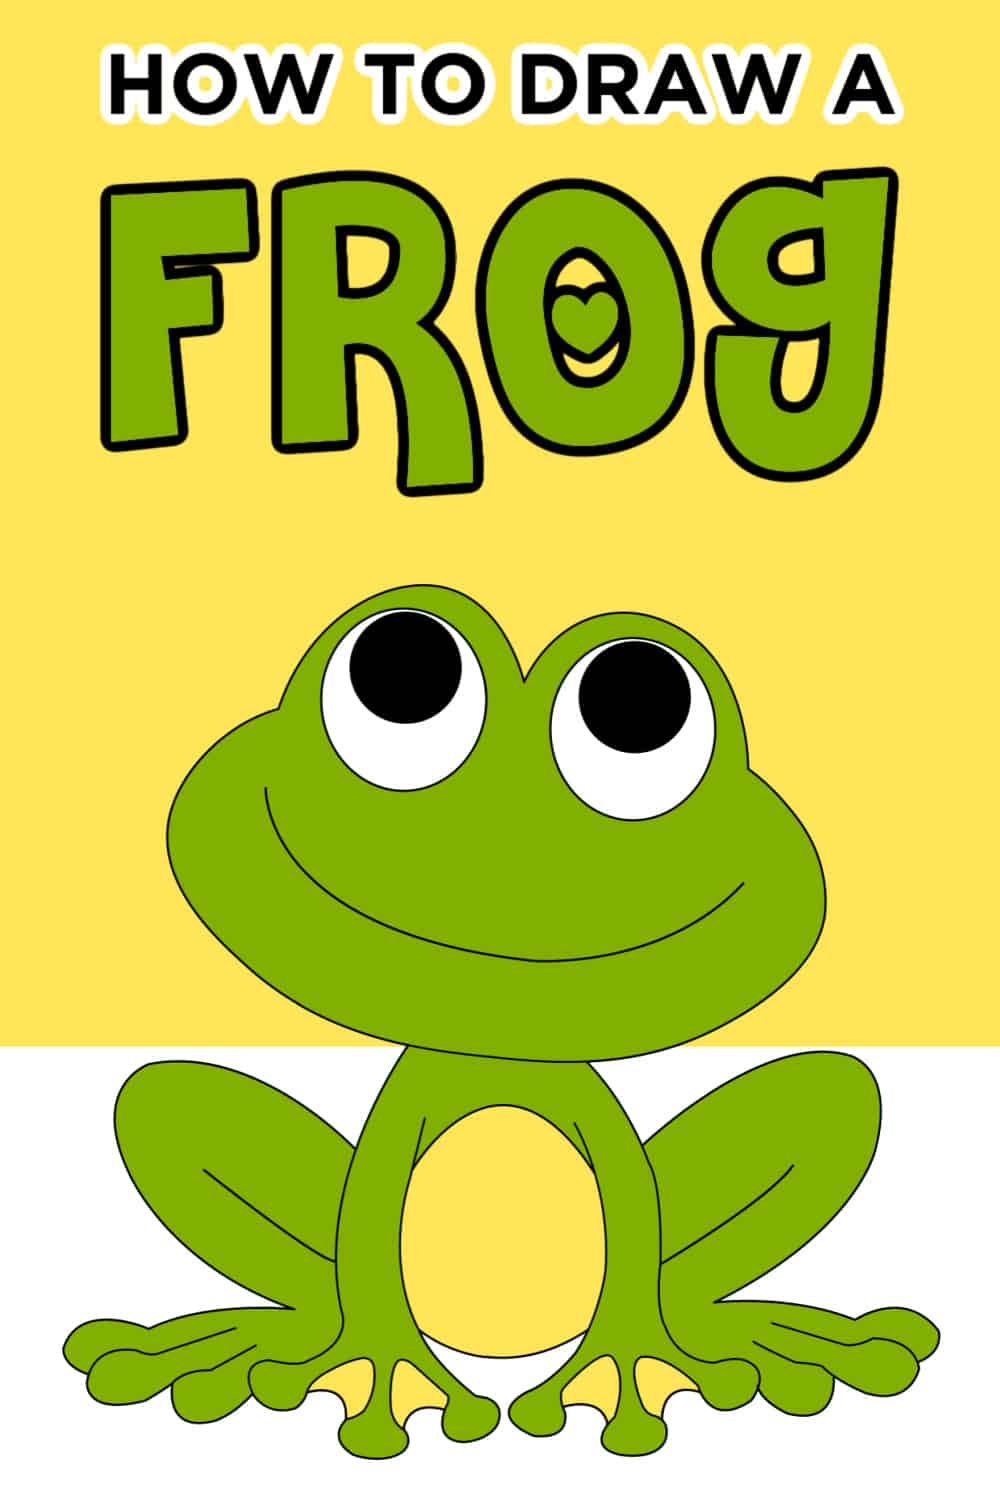 frog drawing for kids